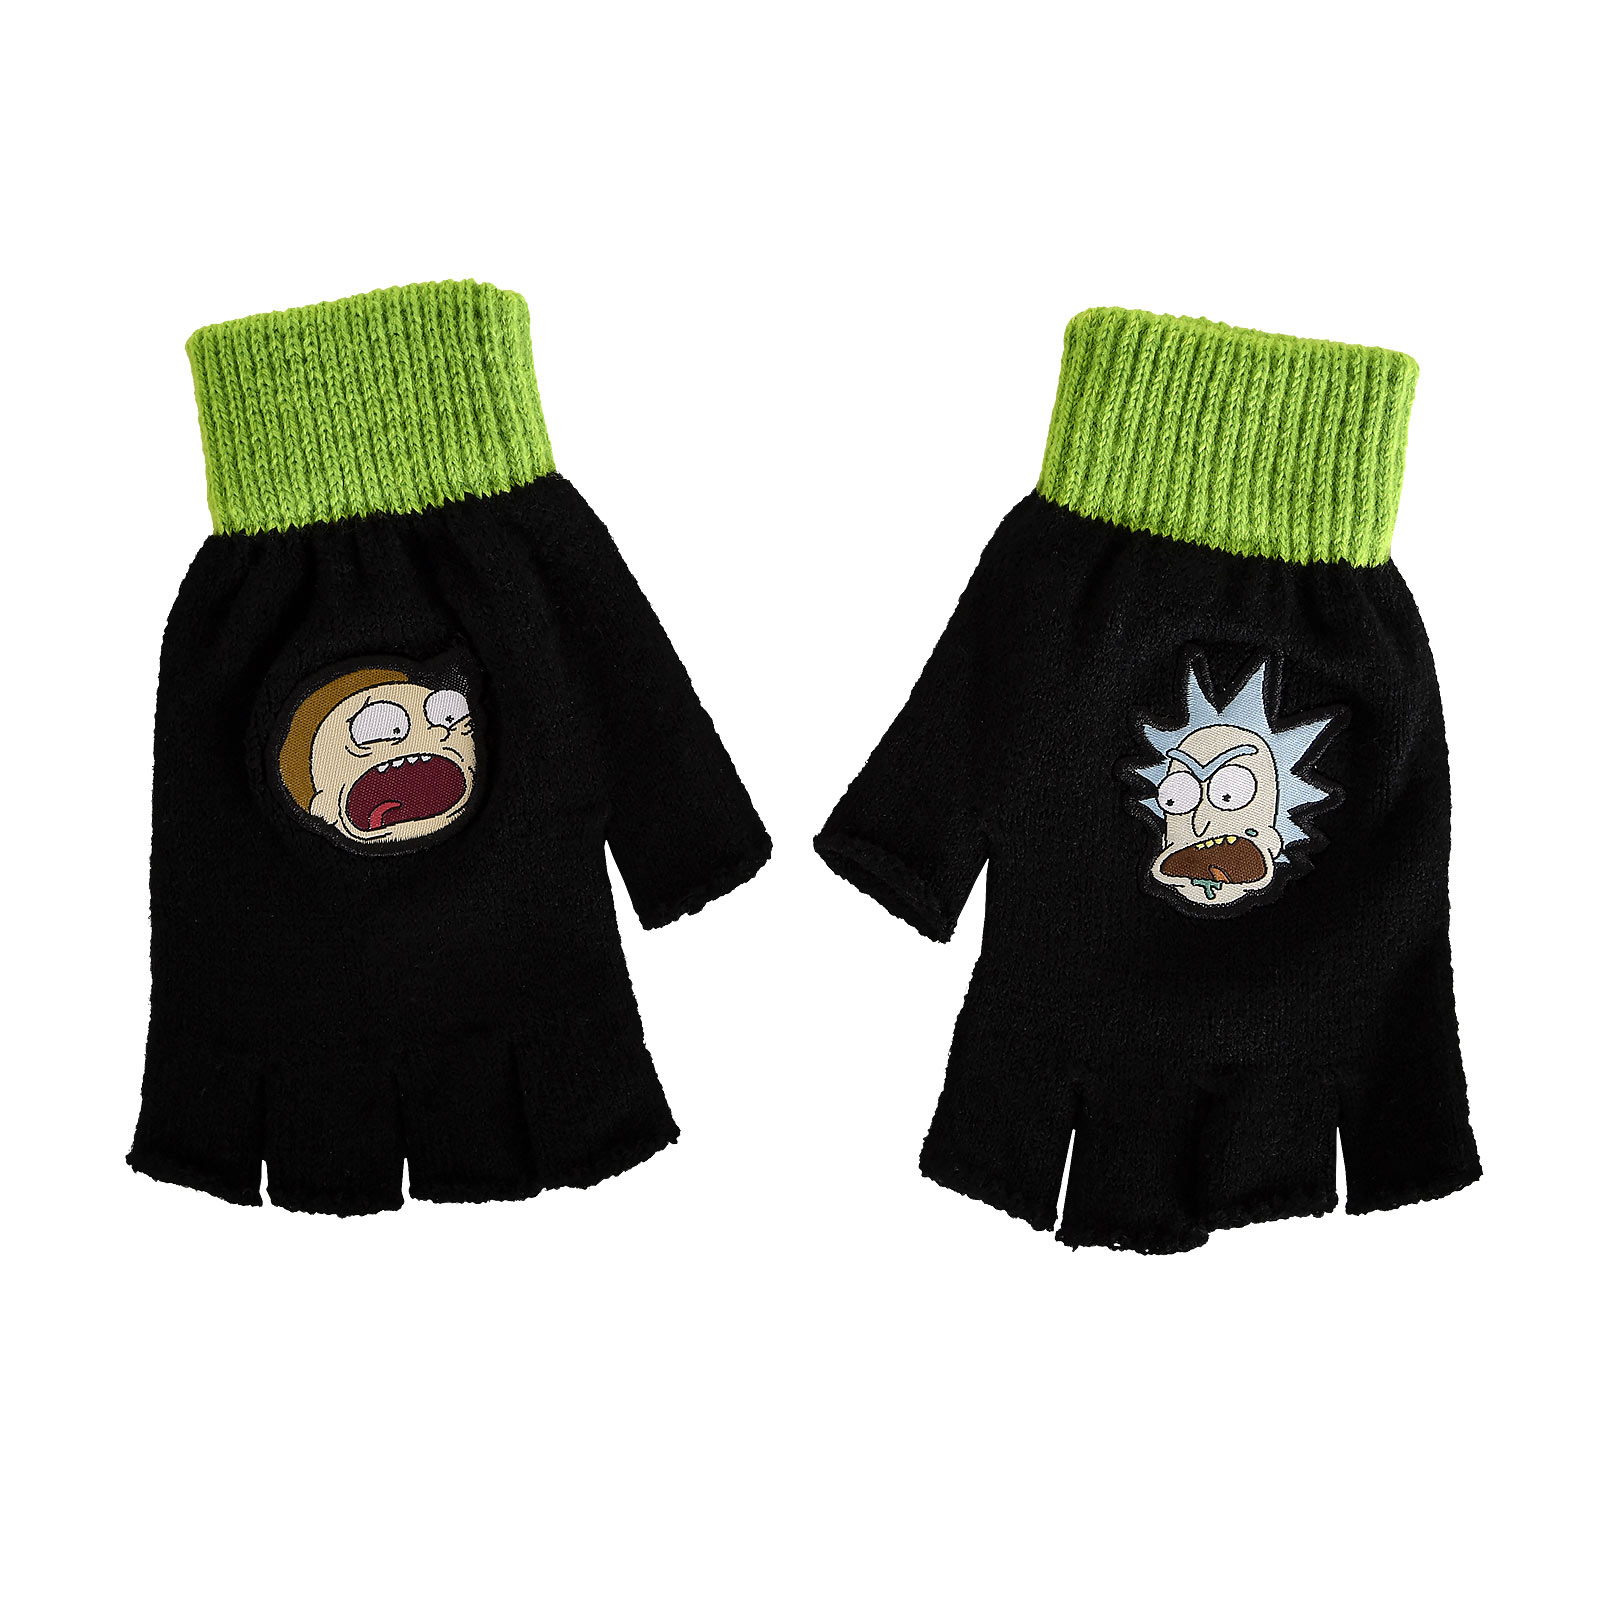 Rick and Morty - Fingerless Faces Gloves black